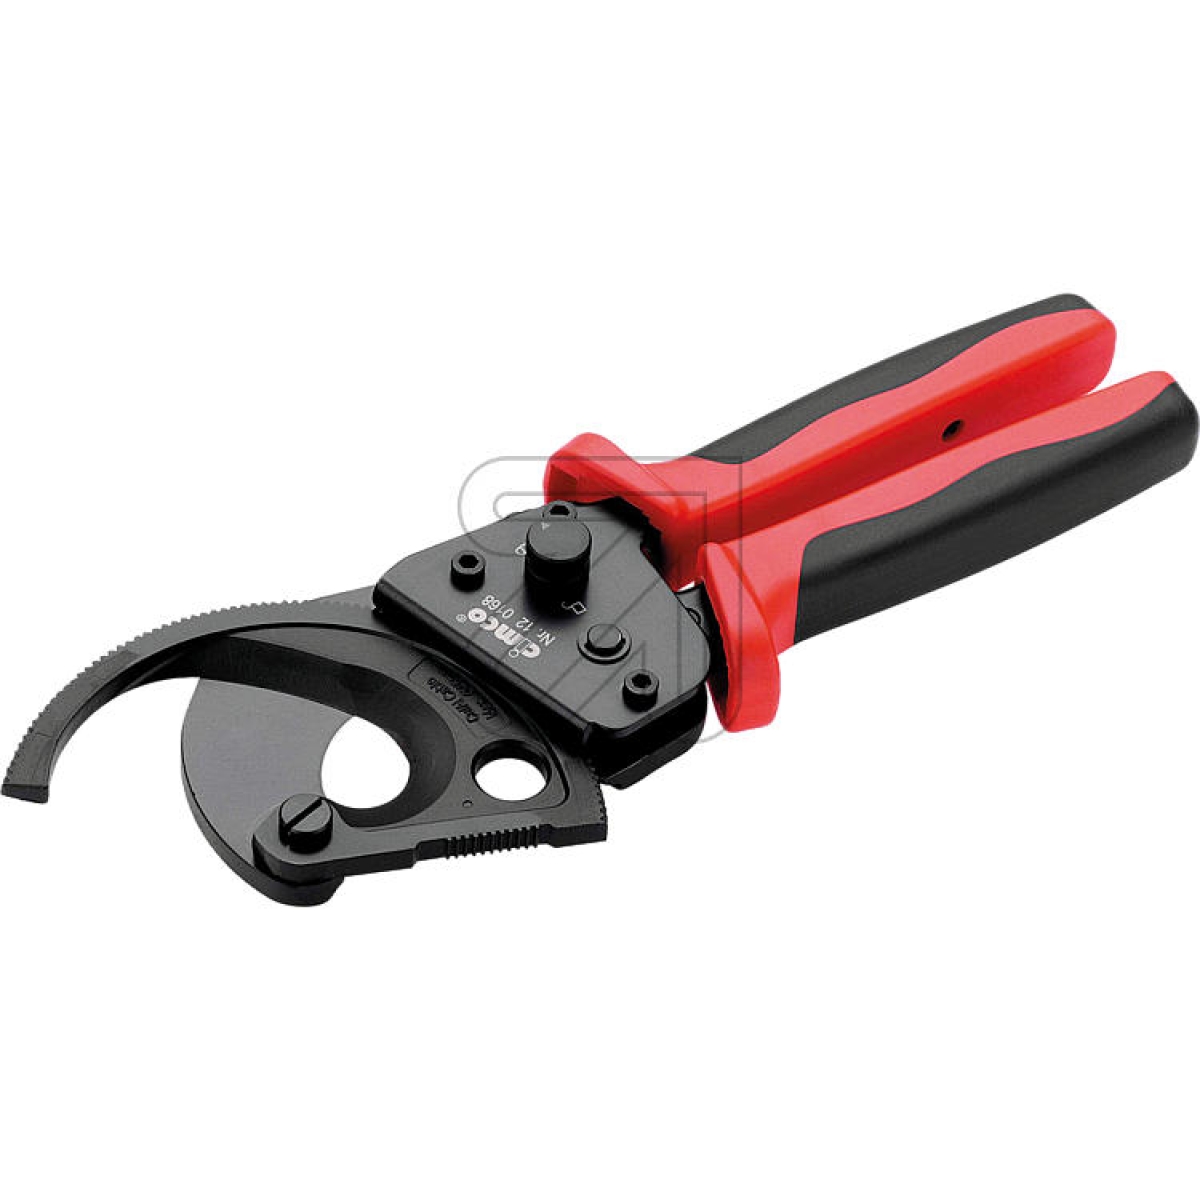 cimcoOne-hand ratchet cable cutter 120168Article-No: 755960